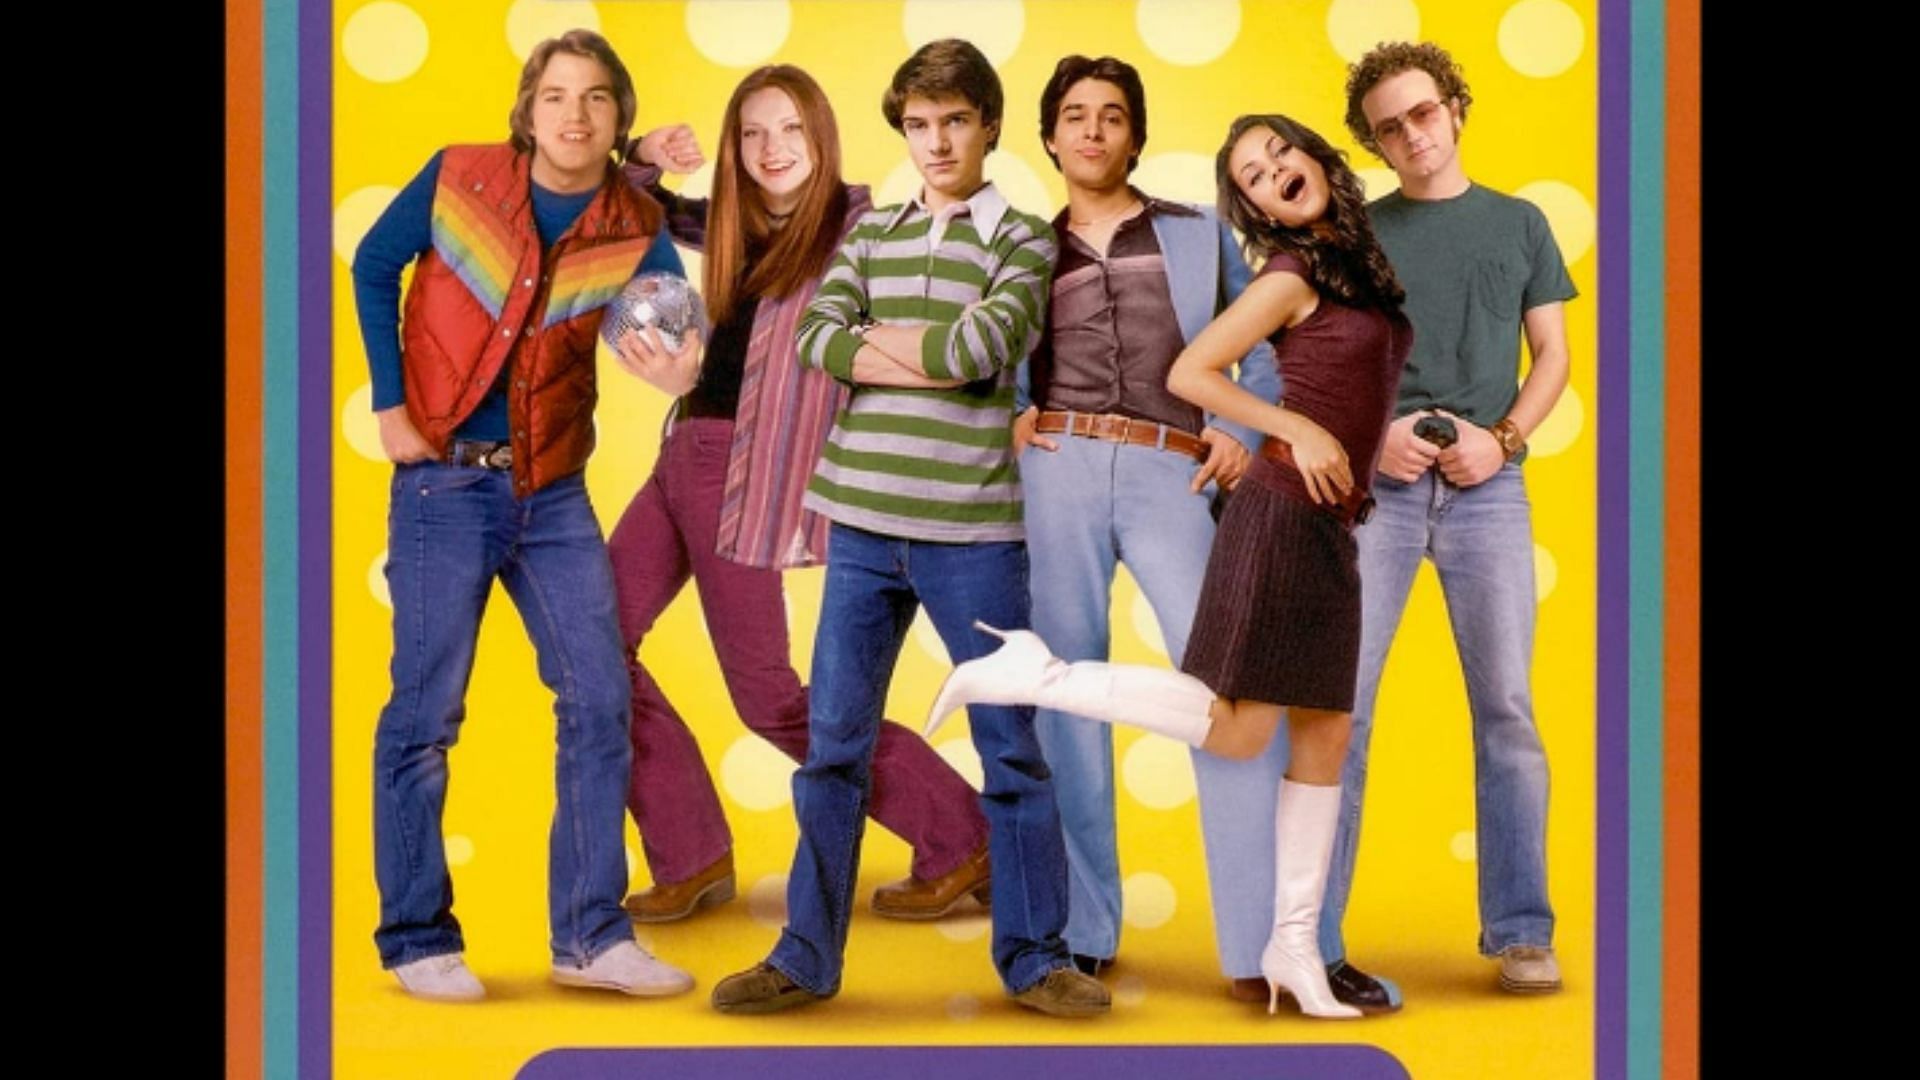 How old are the That '70s Show cast members and where are they now?